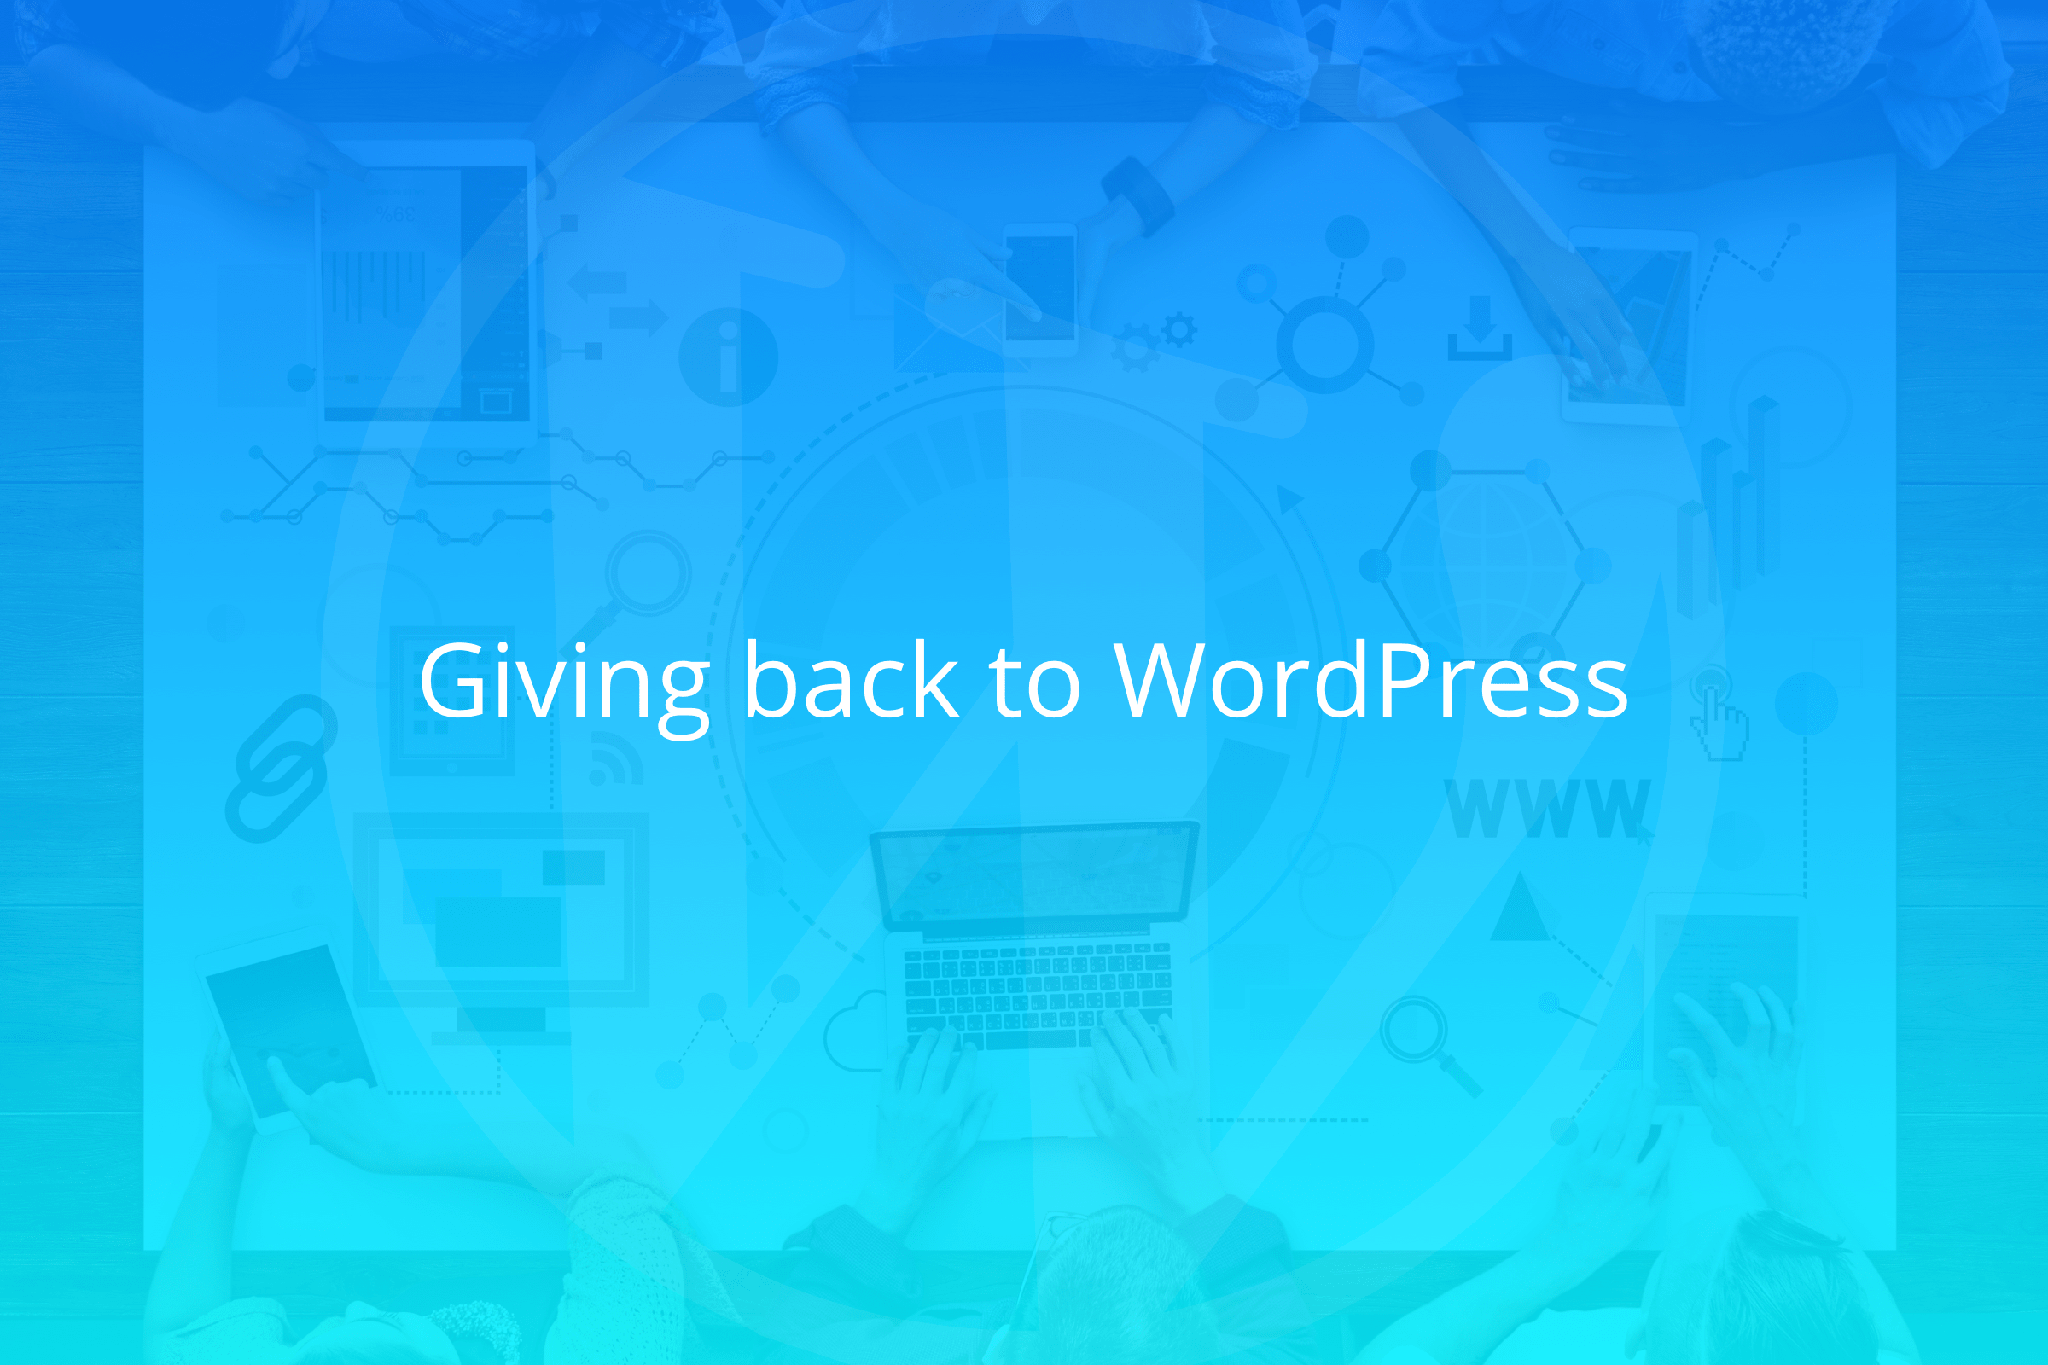 Multidots’ Contributions to WordPress: Because Giving away is the way to make a Technology Powerful!